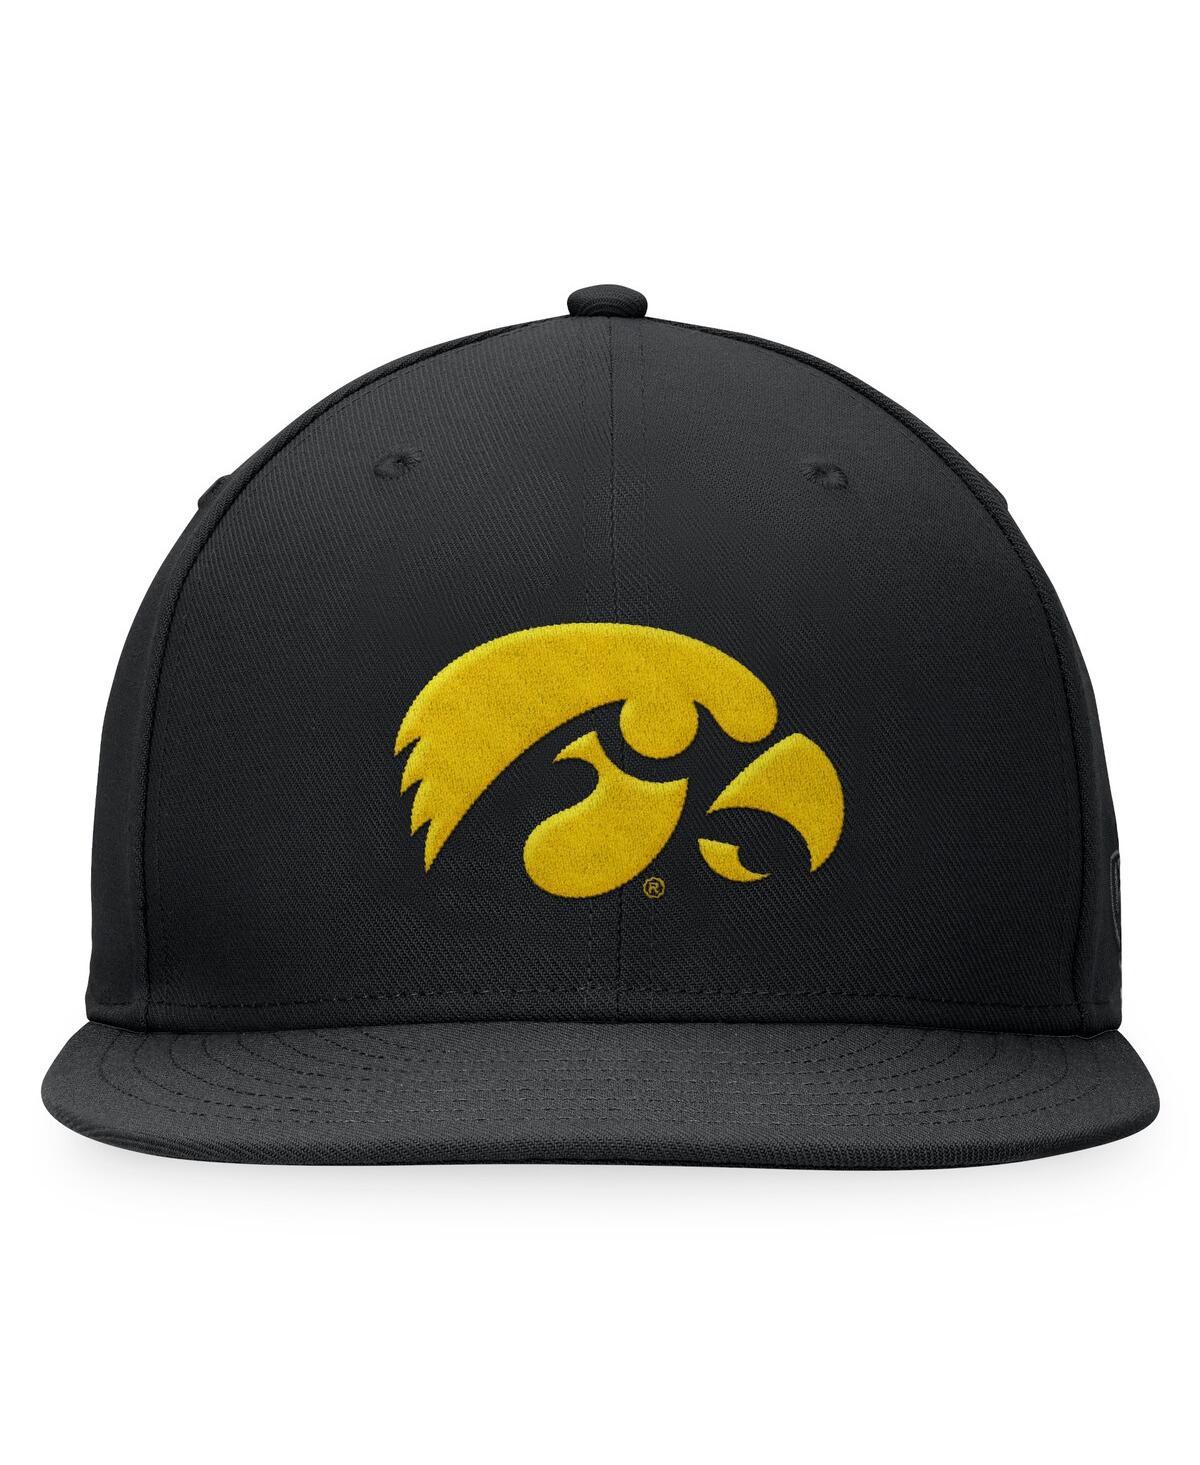 Shop Top Of The World Men's  Black Iowa Hawkeyes Fitted Hat